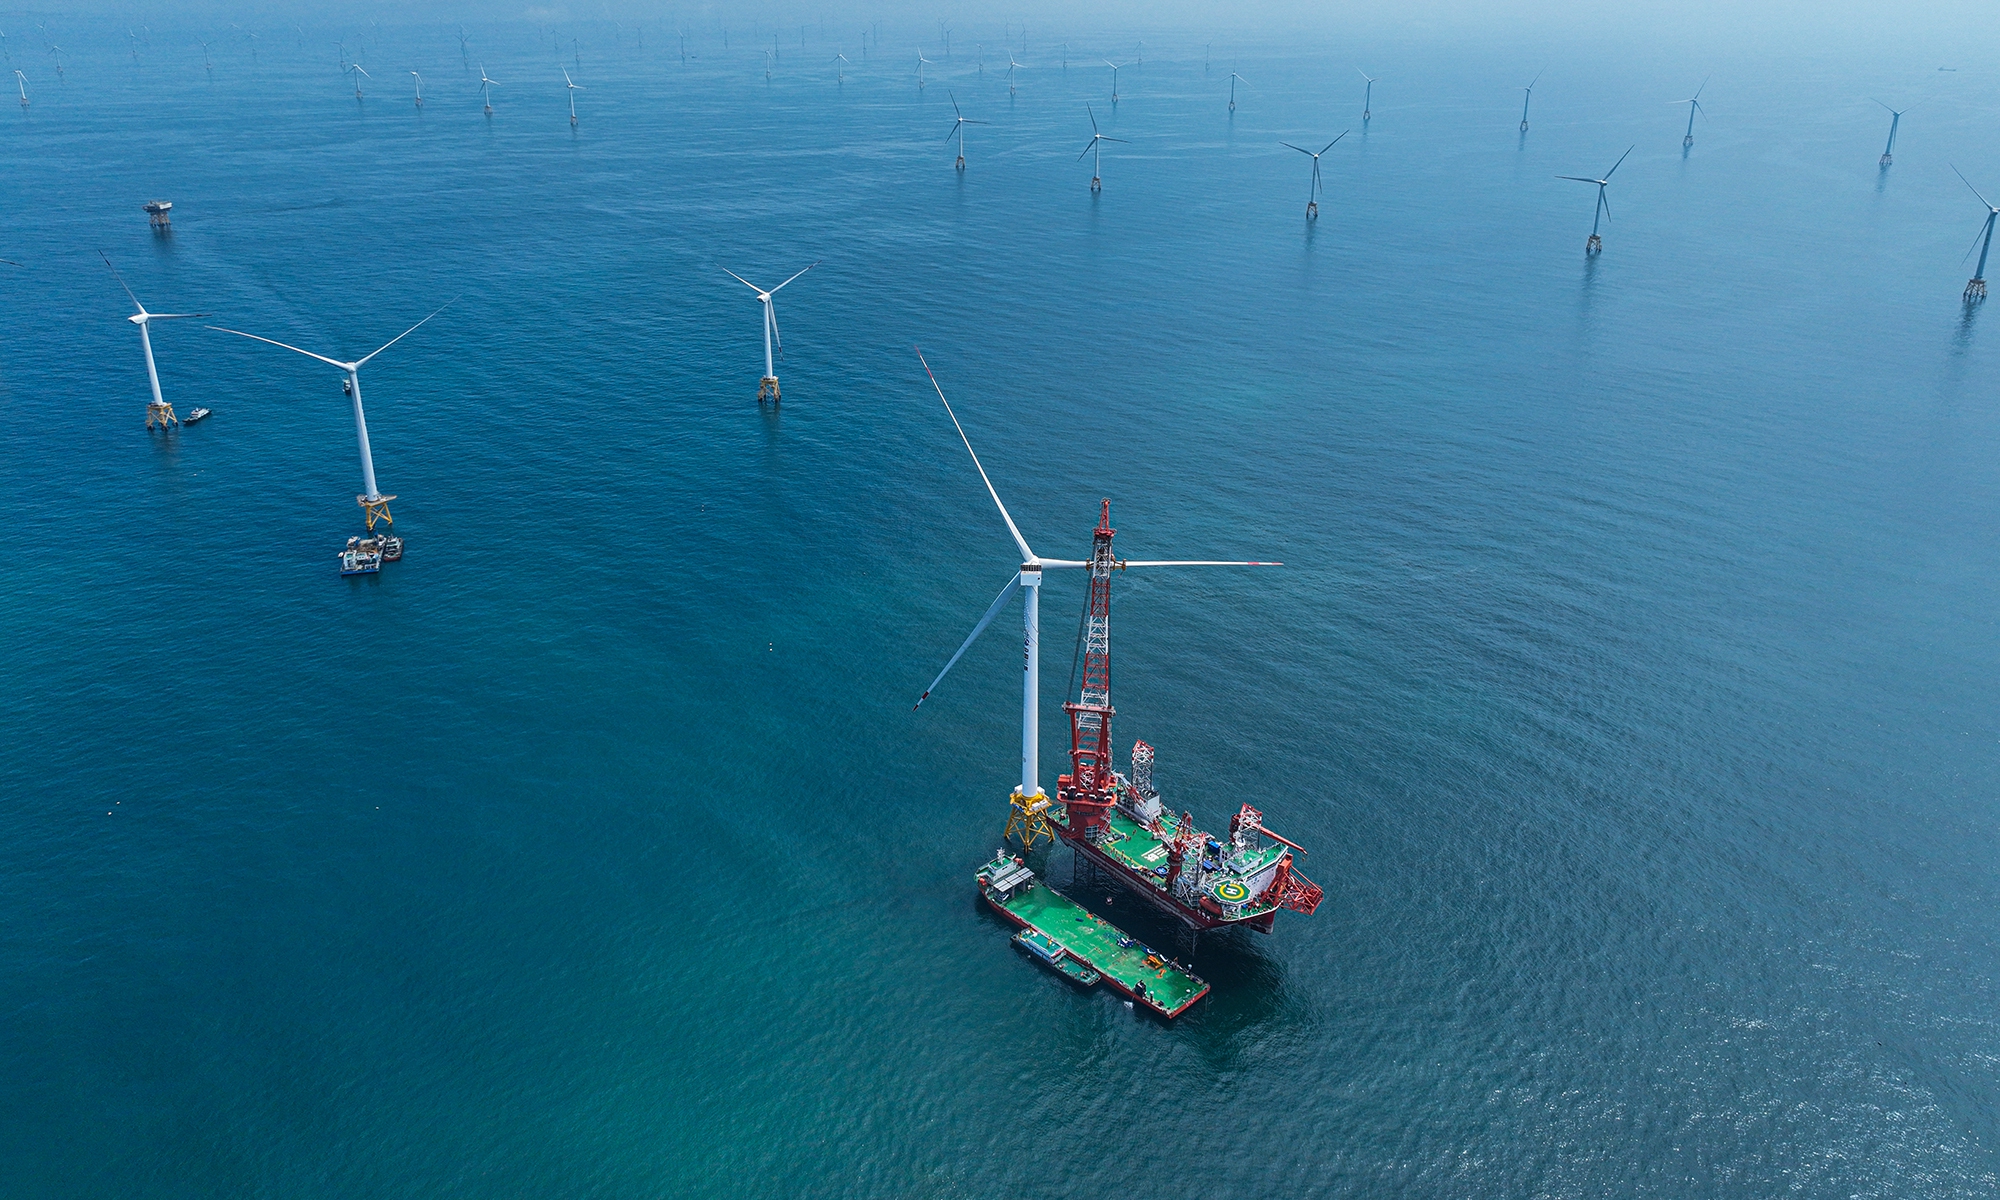 World's largest single capacity offshore wind turbine successfully installed - Global Times